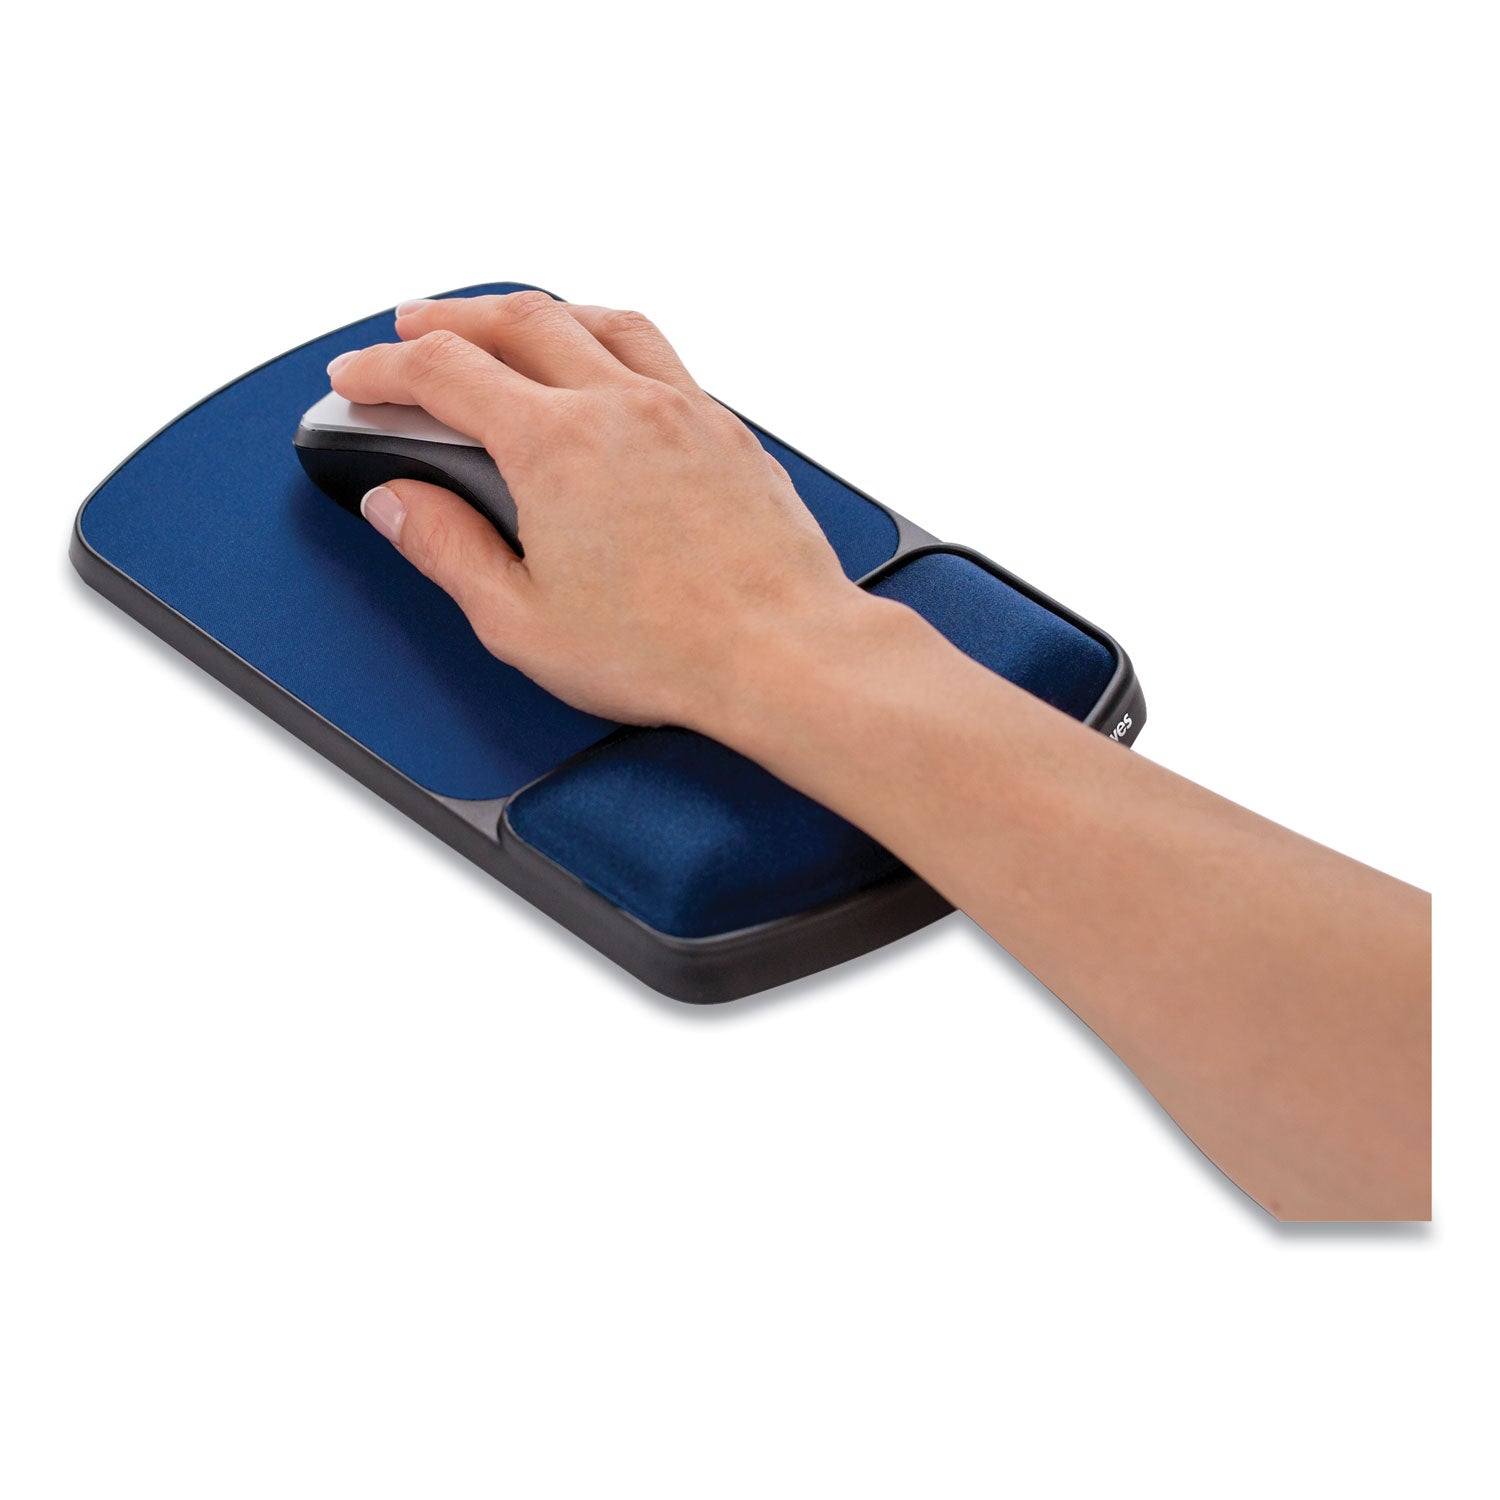 Gel Mouse Pad with Wrist Rest, 6.25 x 10.12, Black/Sapphire - 